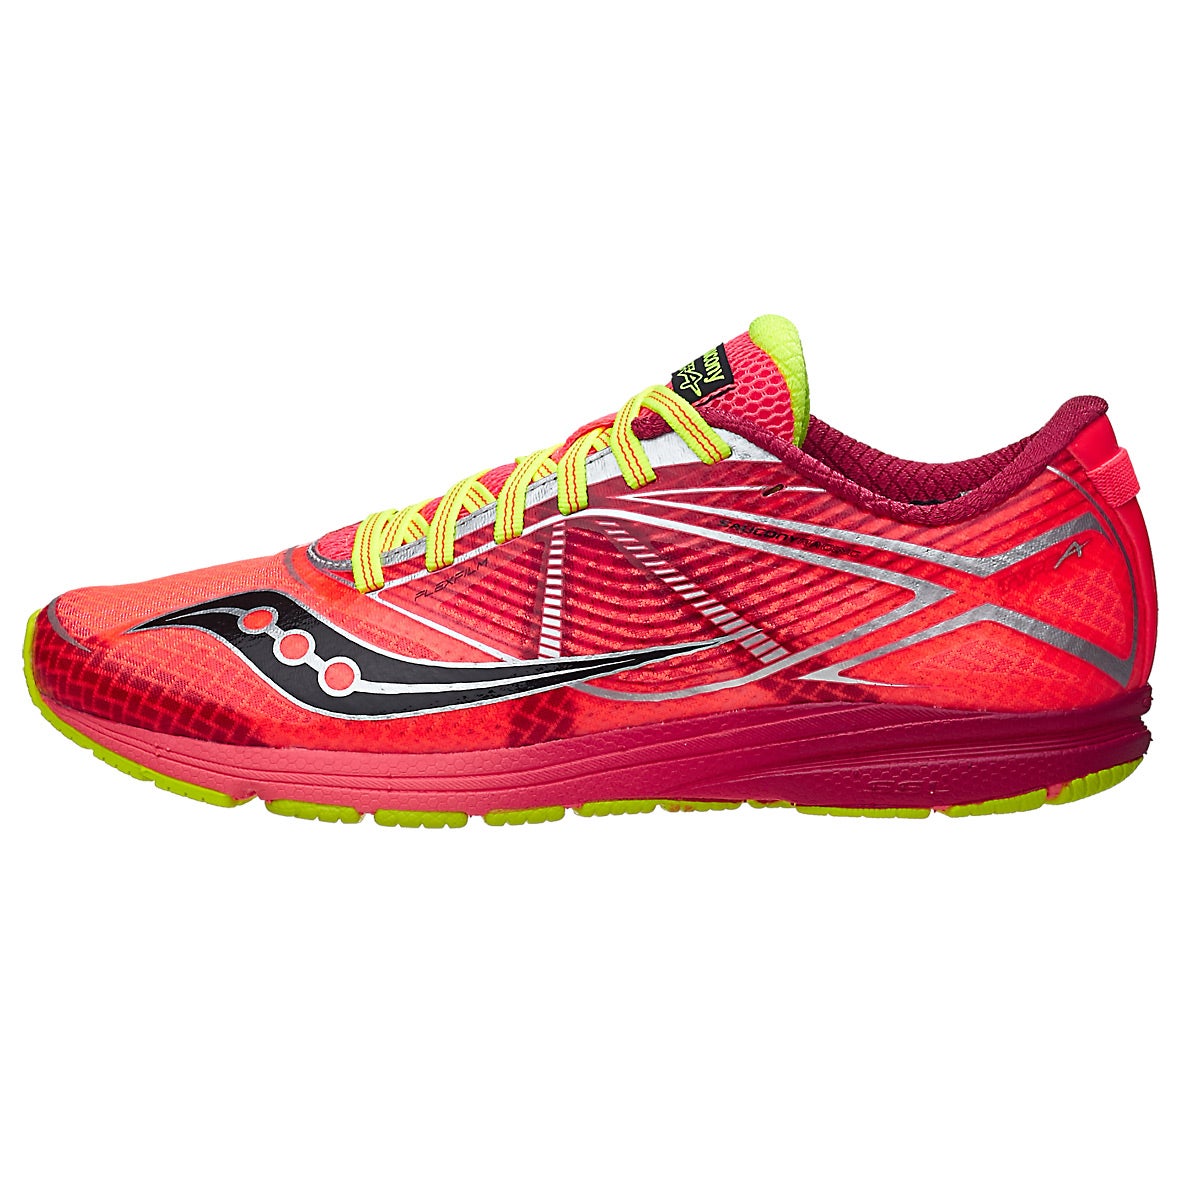 Saucony Type A Women's Shoes ViZiPRO Coral/Citron 360° View | Running ...